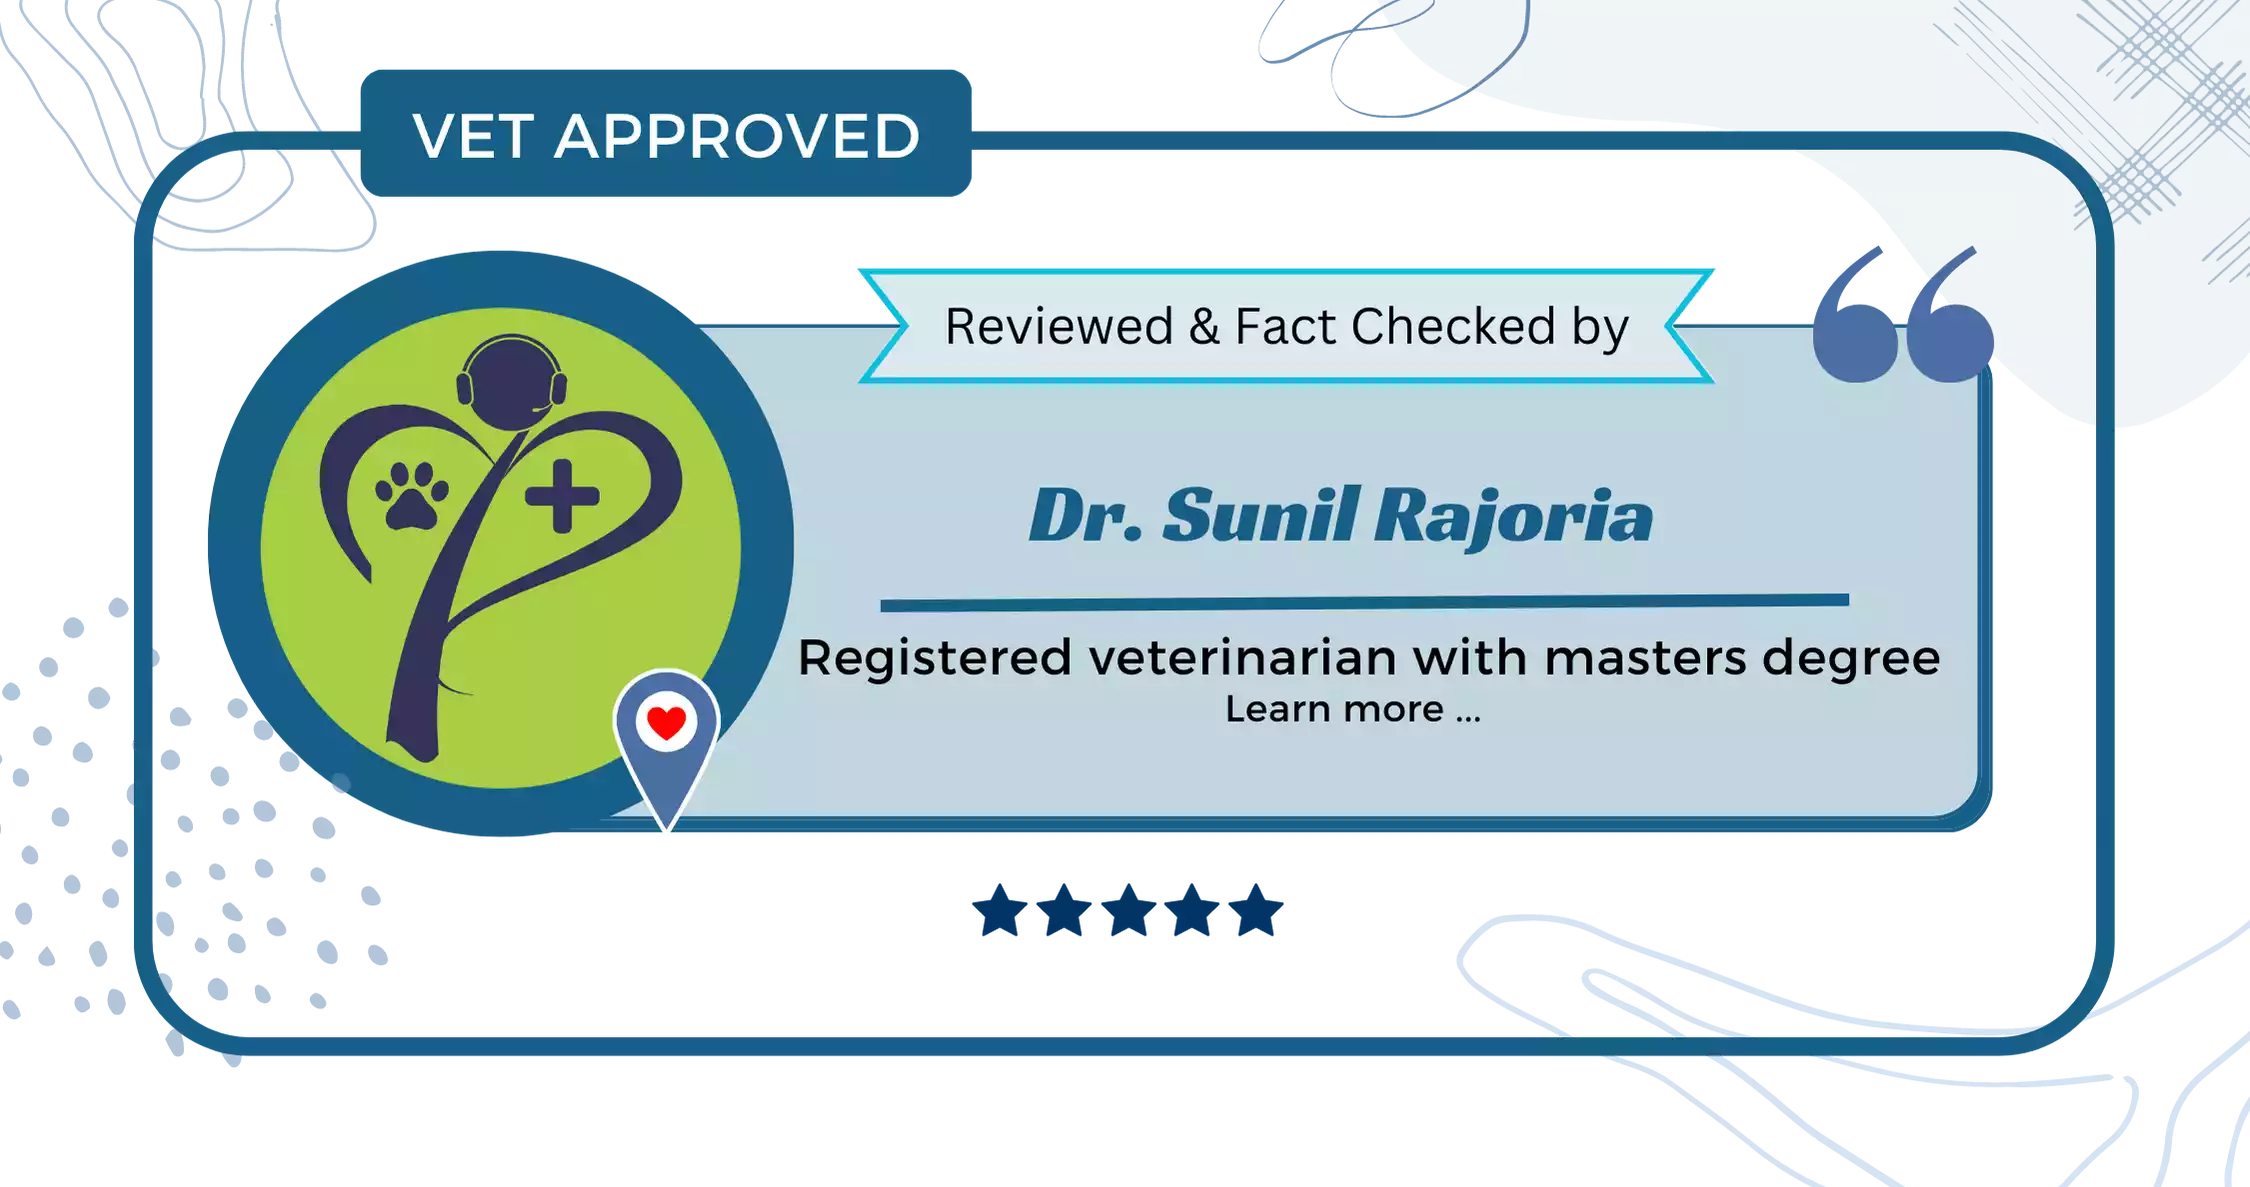 The Vet Approved and Fact Checked by Dr. Sunil Rajoria